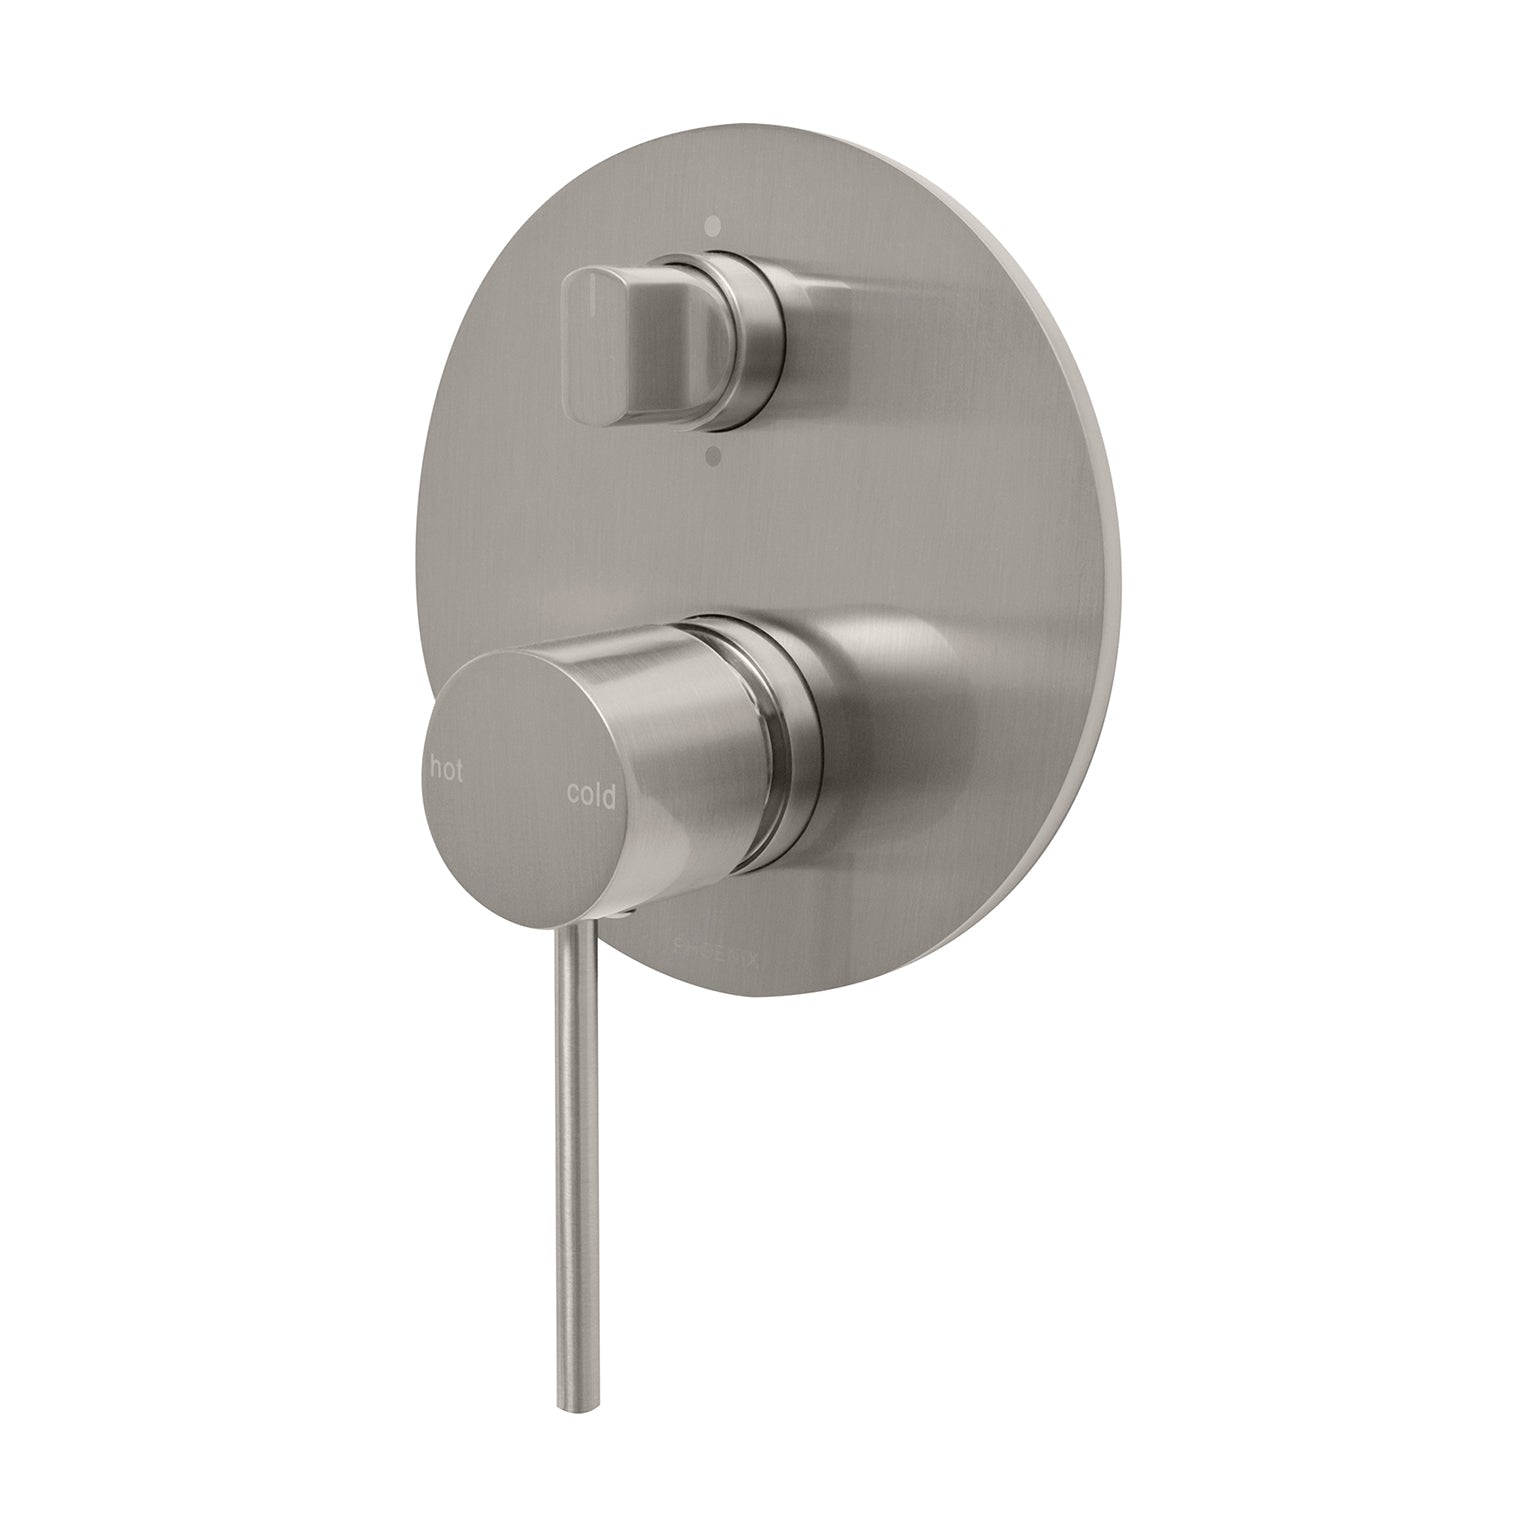 PHOENIX VIVID SLIMLINE SWITCHMIX SHOWER / BATH DIVERTER MIXER FIT-OFF AND ROUGH-IN KIT BRUSHED NICKEL